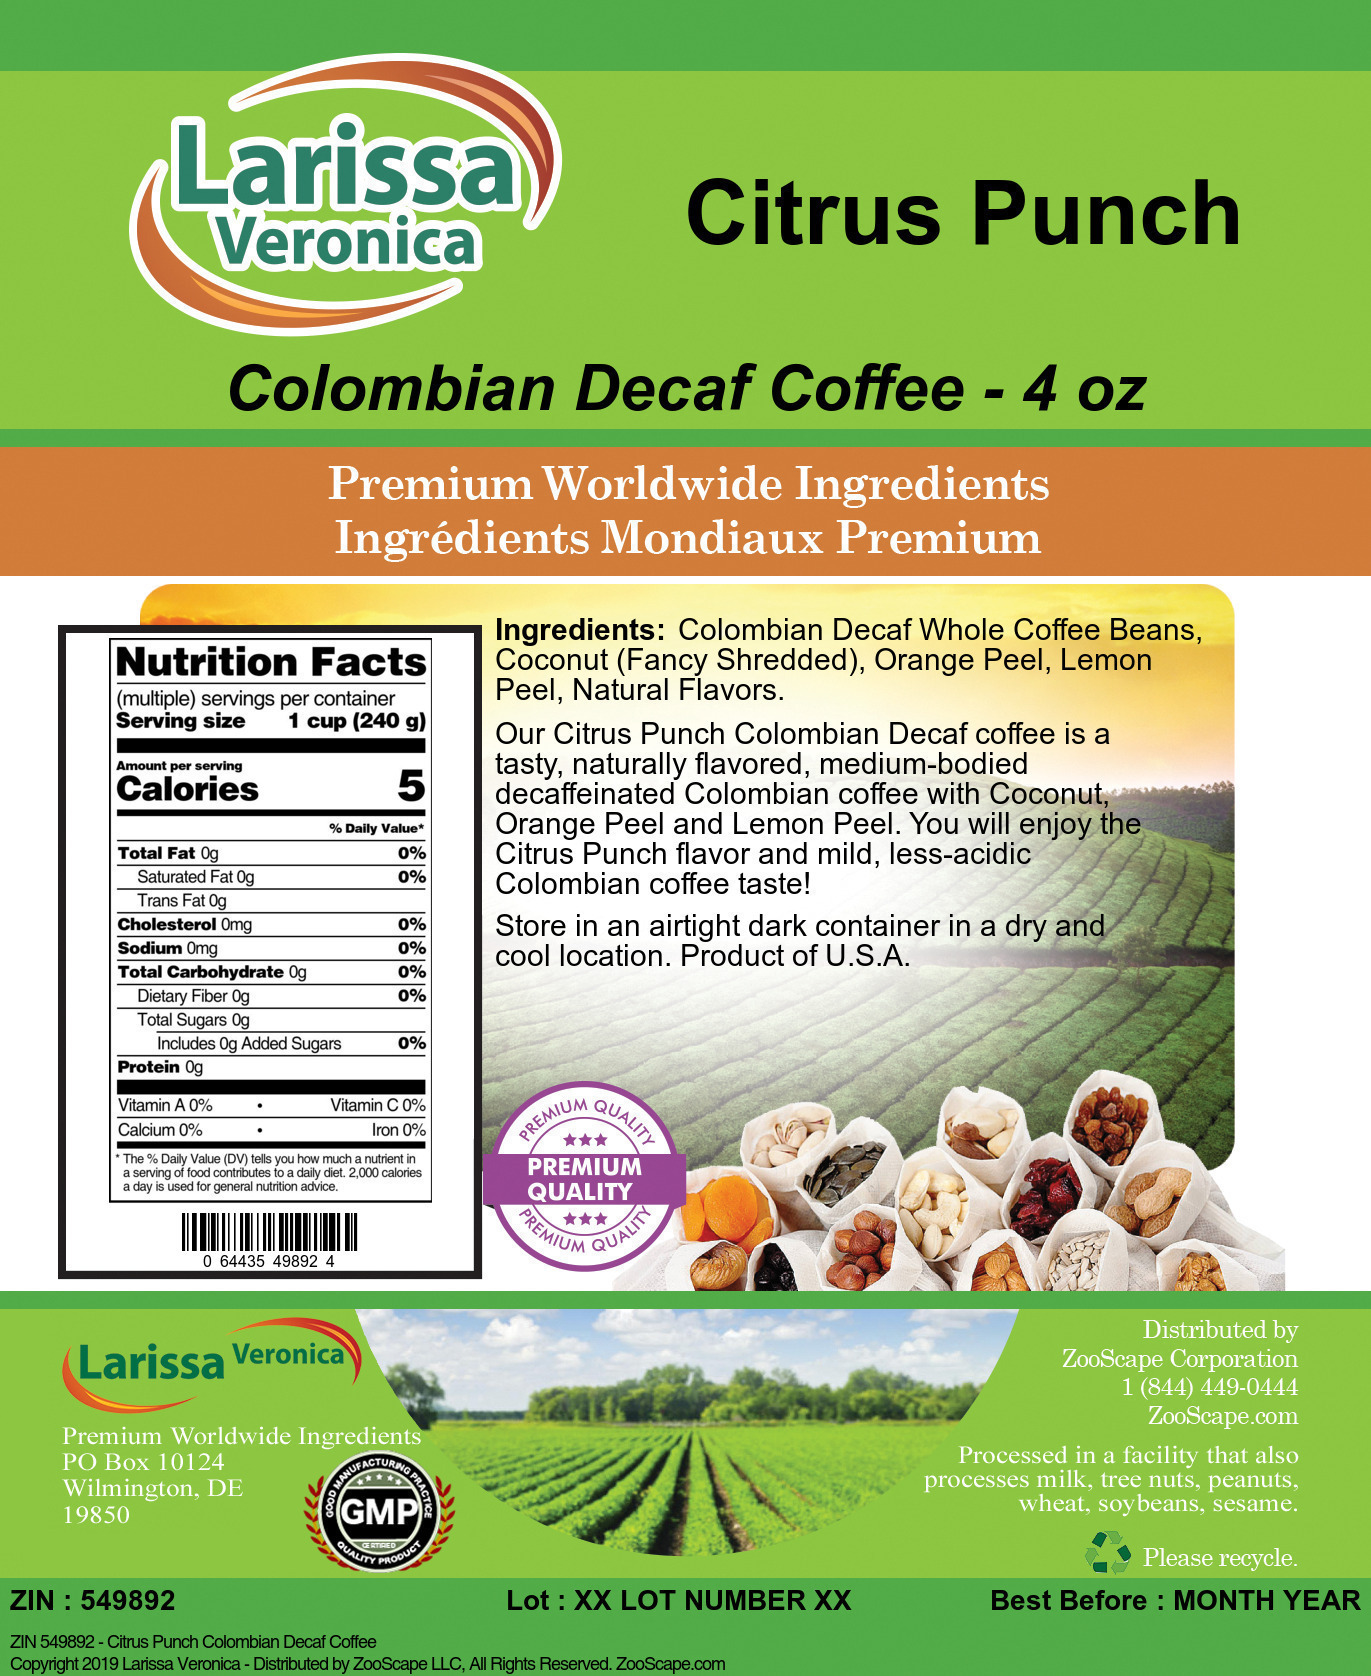 Citrus Punch Colombian Decaf Coffee - Label